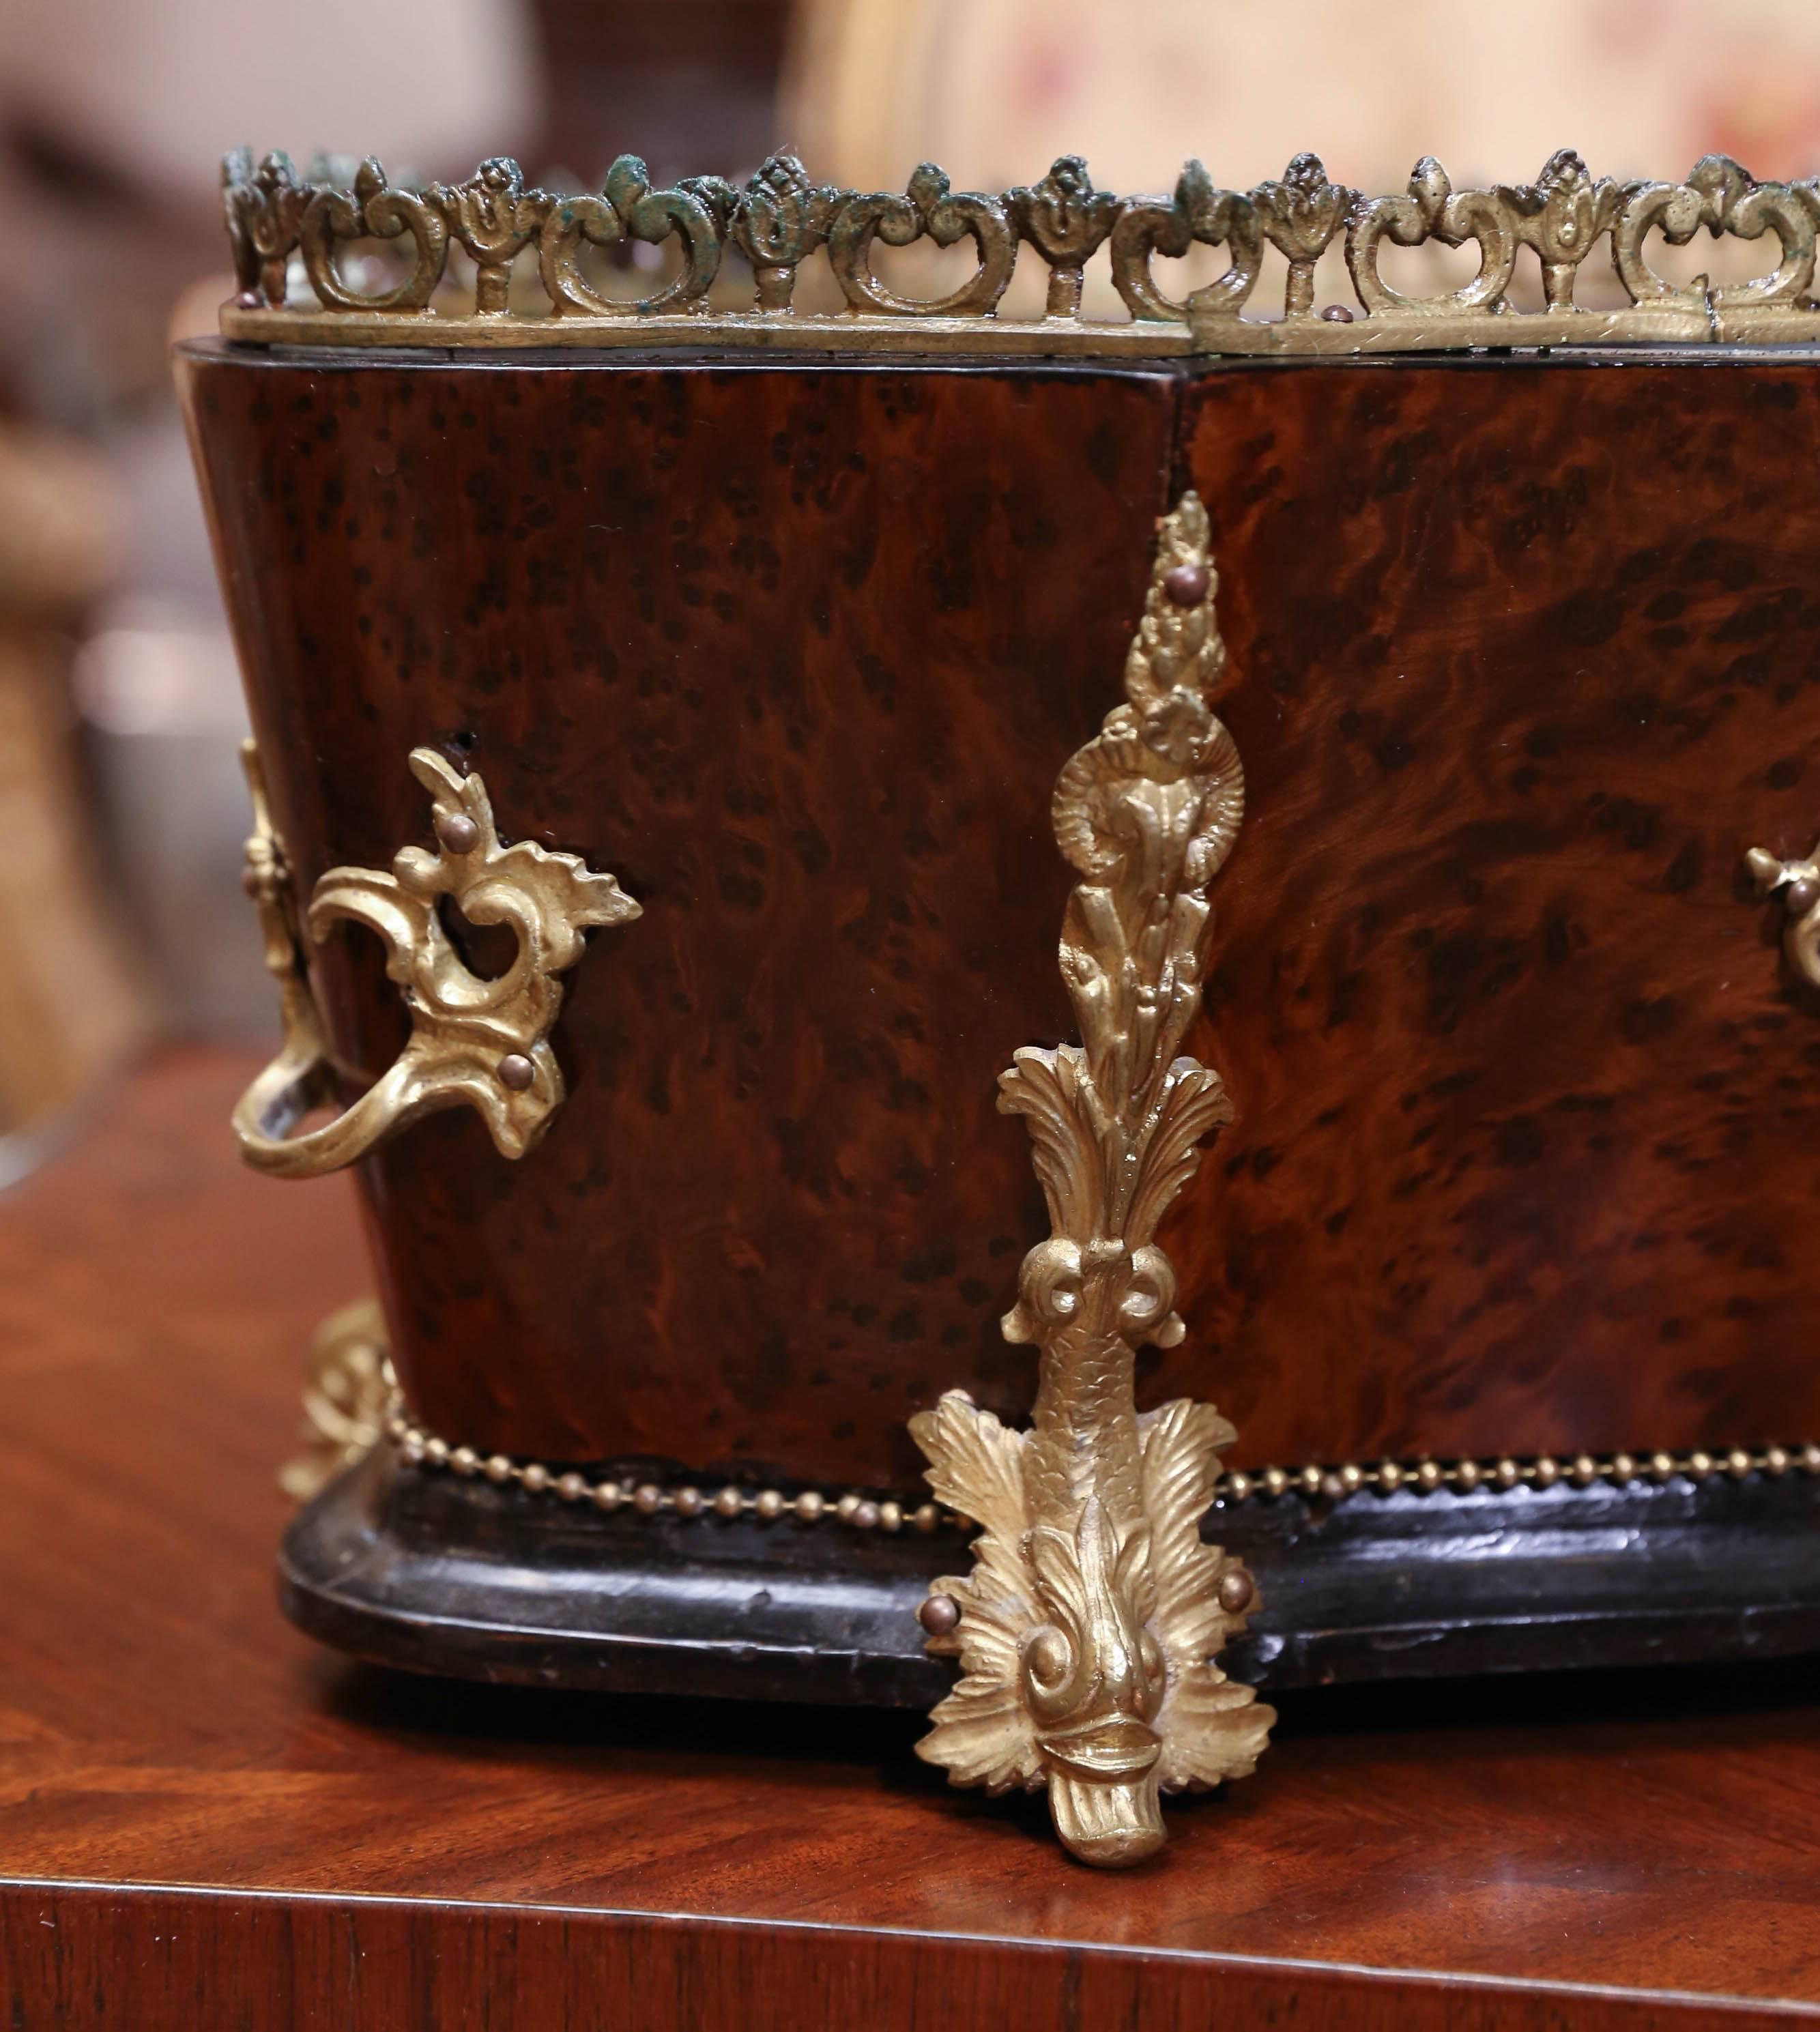 Buried wood jardiniere in oval form with bronze doré embellishments
with bronze handles on opposing sides
ebonized wood base with beaded trim.